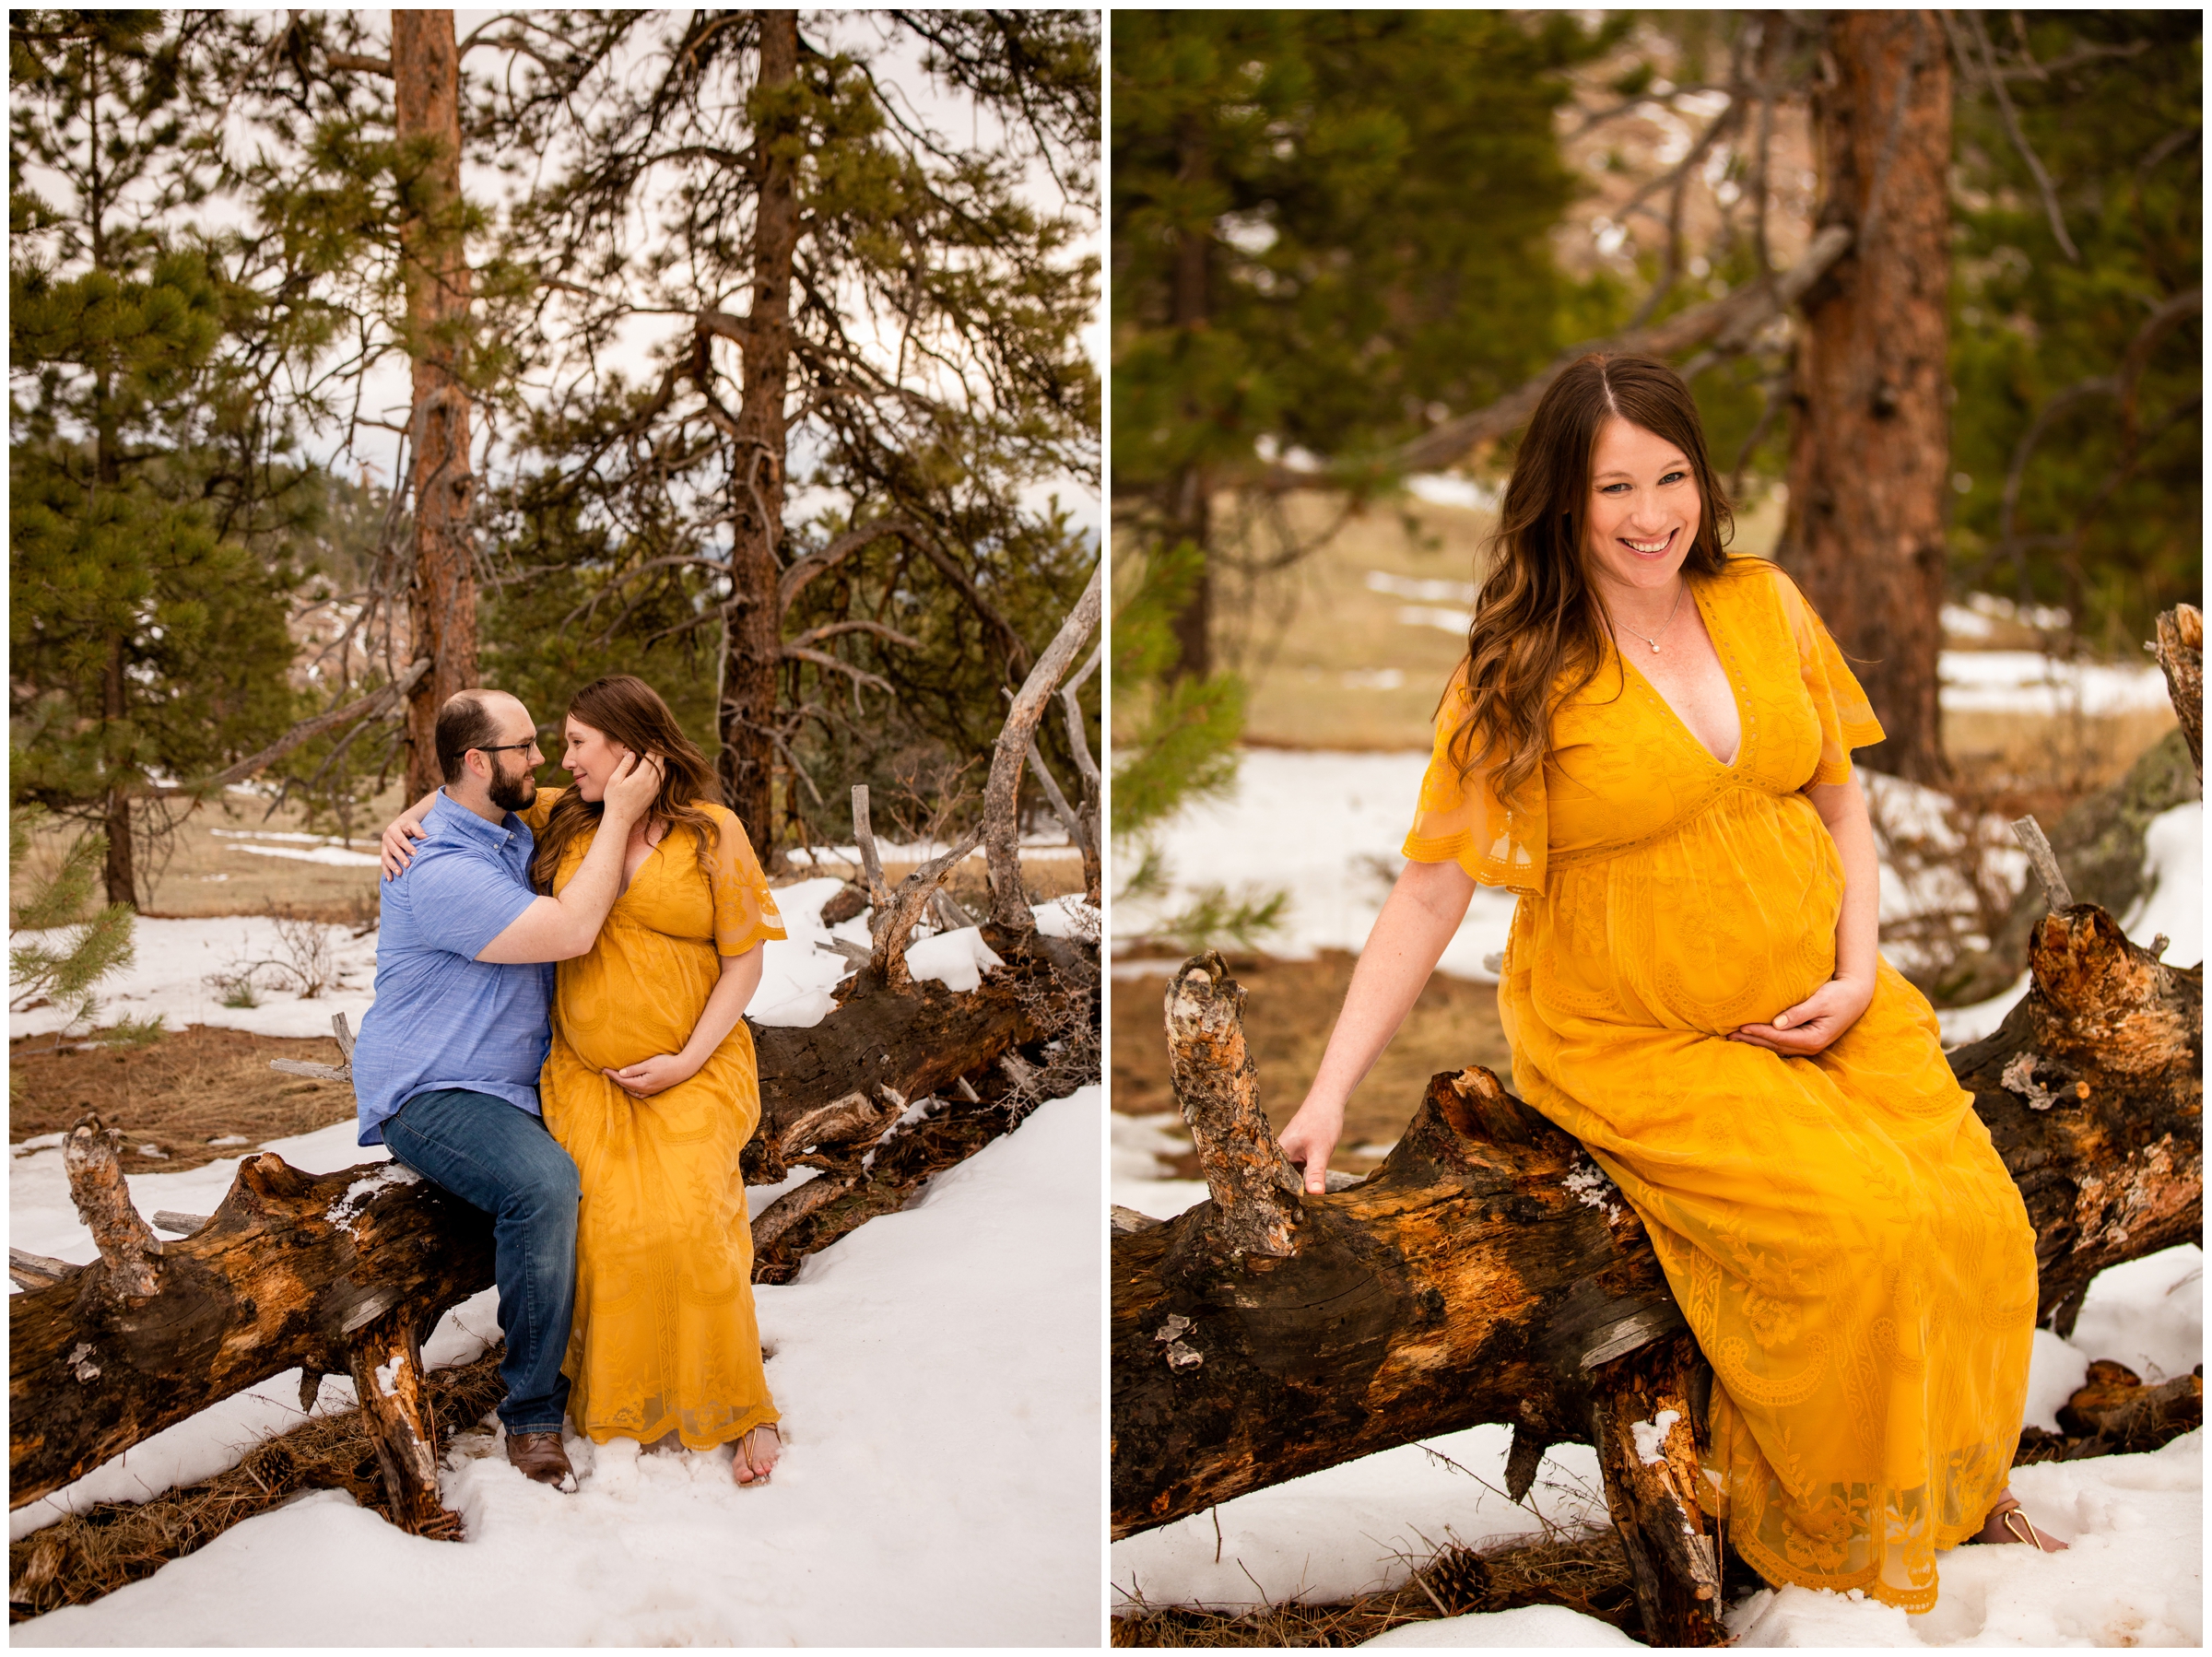 winter pregnancy photos in a CO forest setting 